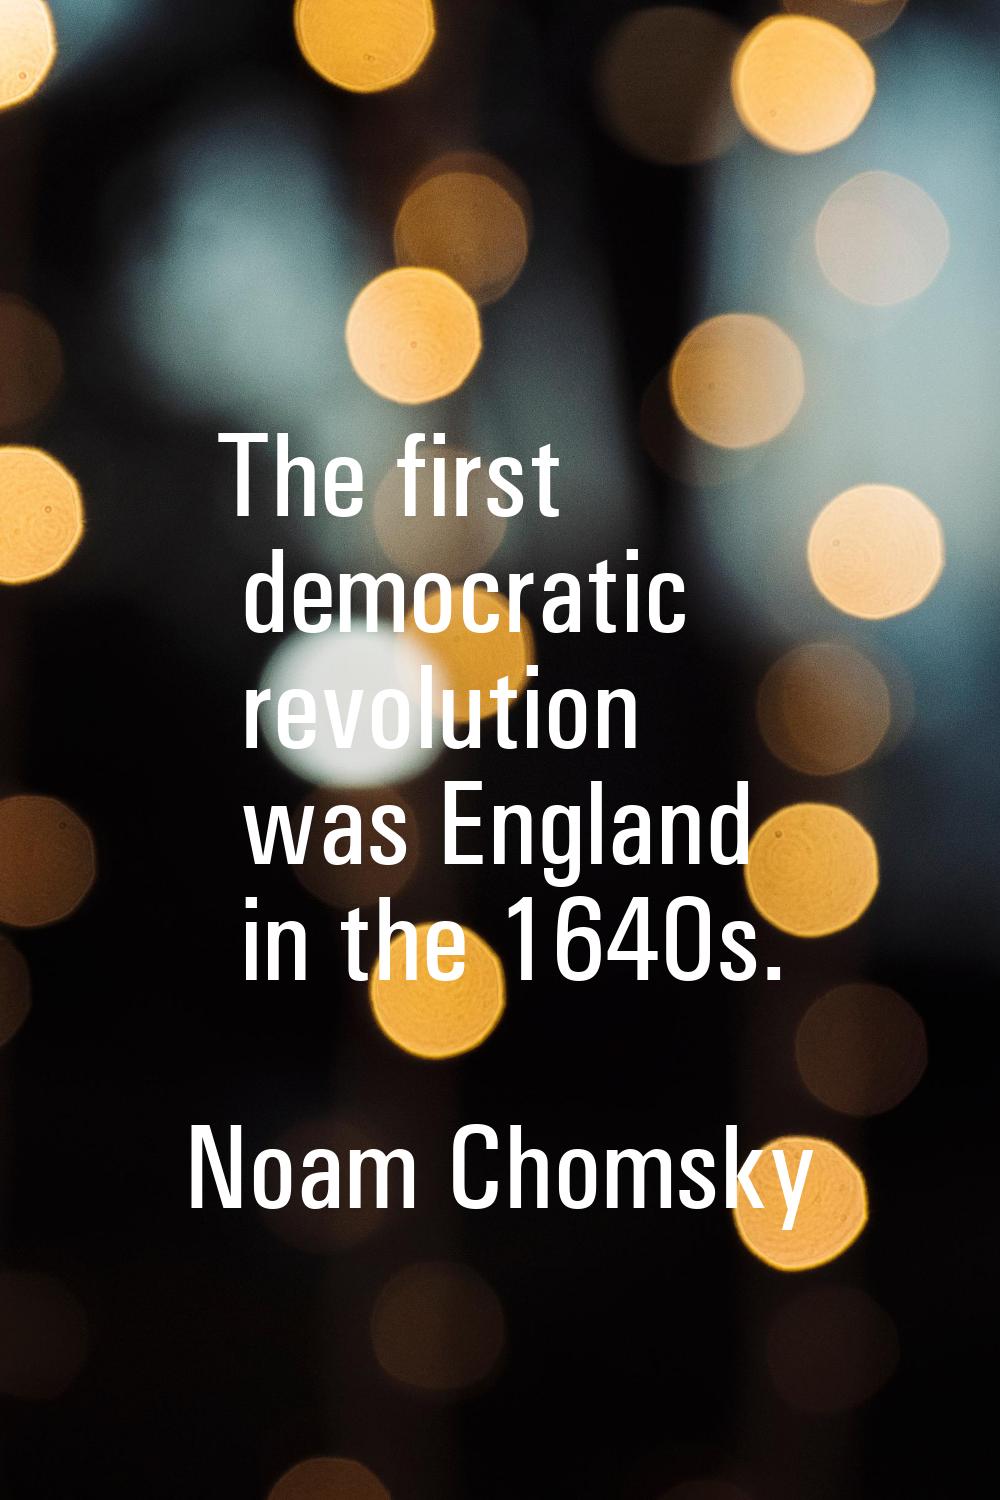 The first democratic revolution was England in the 1640s.